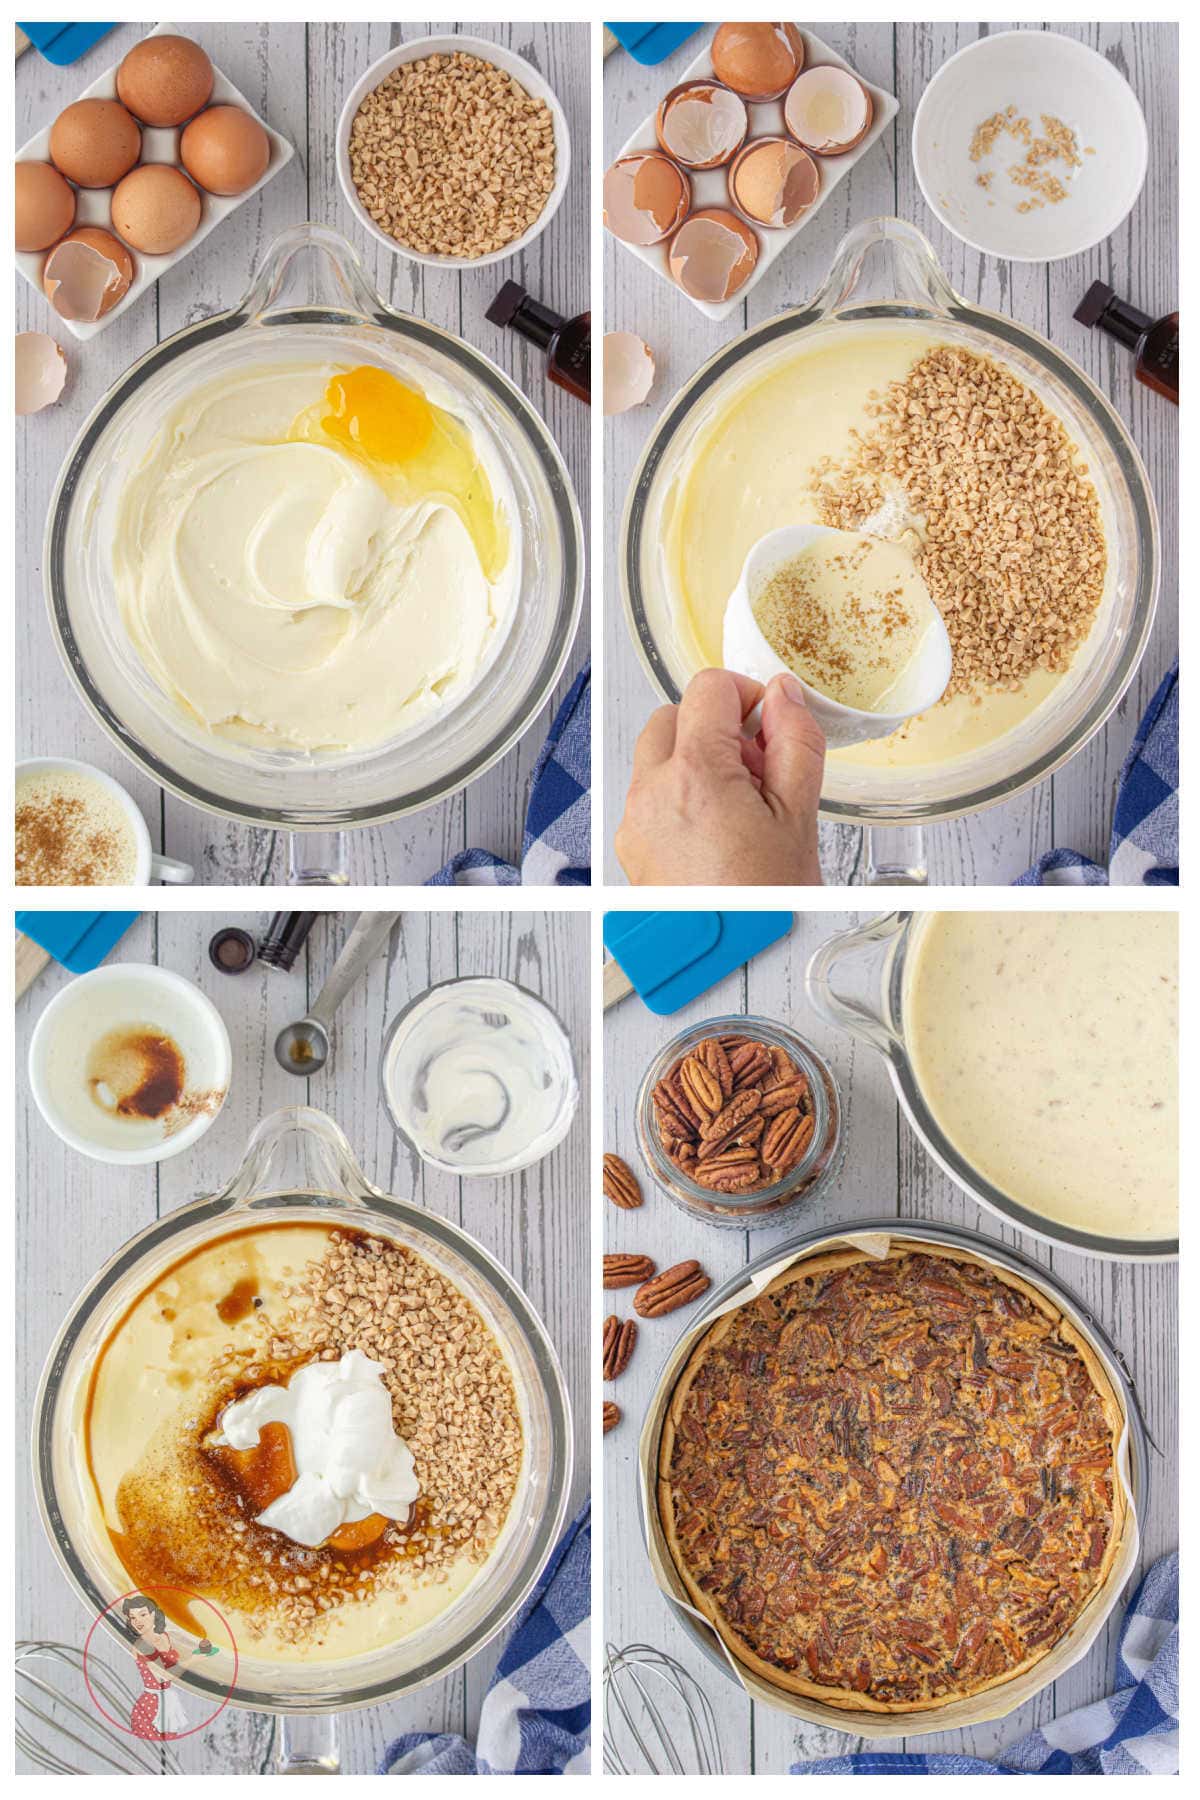 Step by step images showing how to make the cheesecake layer of this recipe.